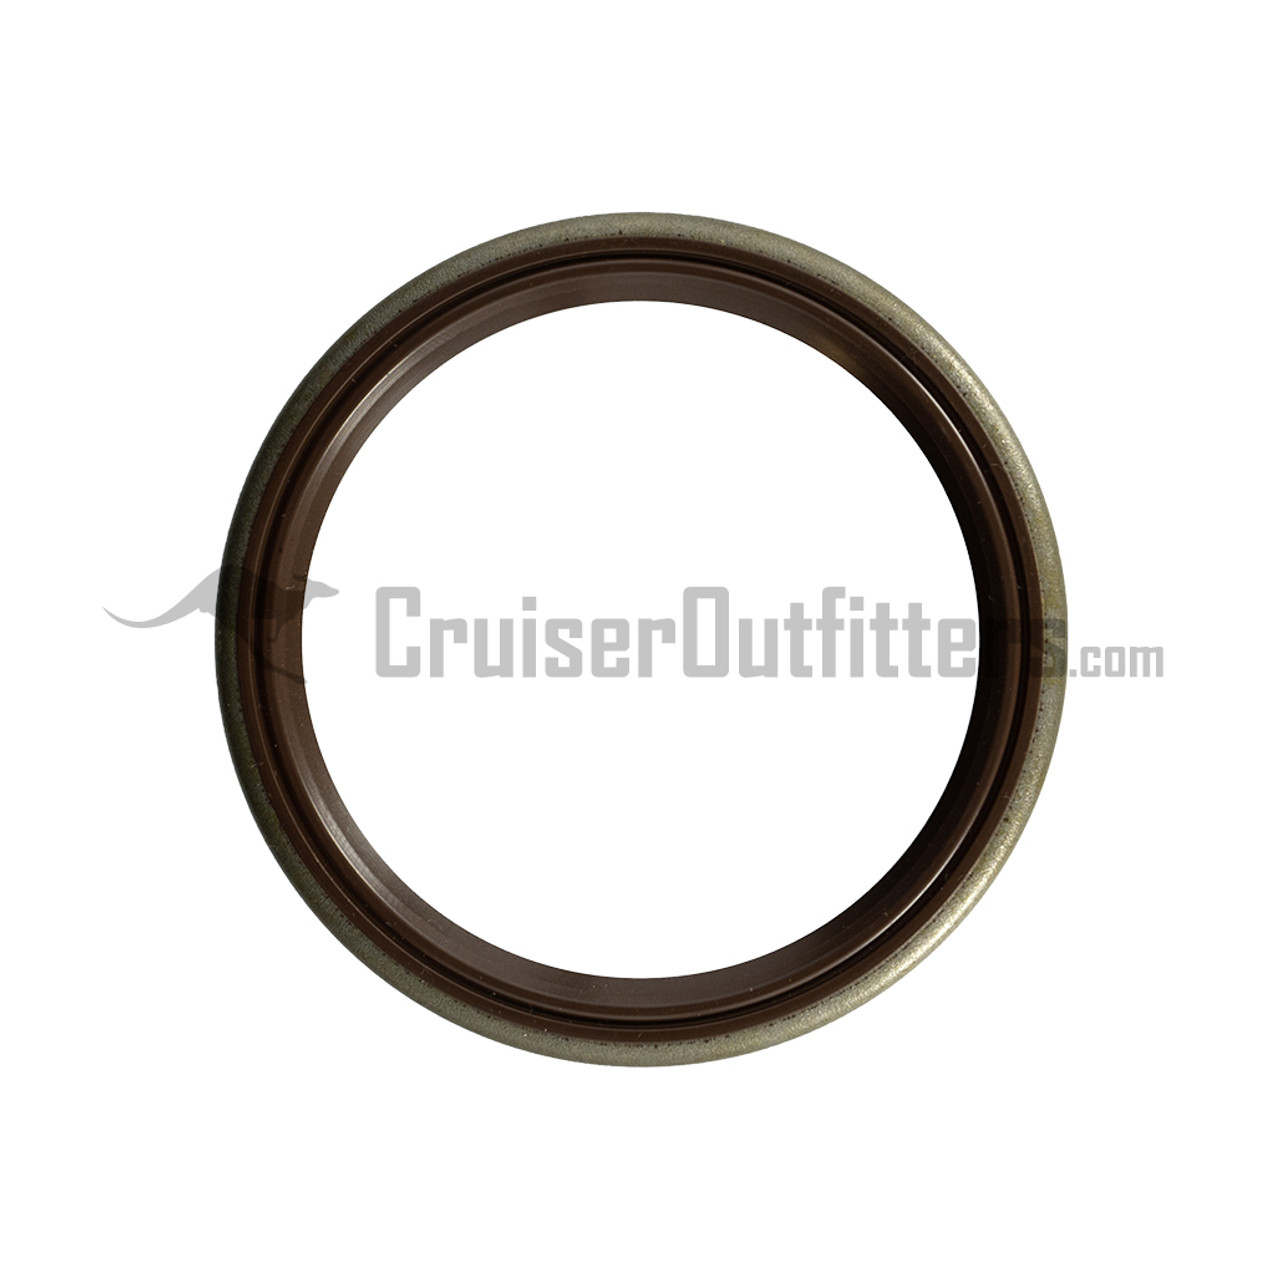 Outer Wheel Seal - OEM Toyota - Fits (2 Required per Vehicle) (HG62003)